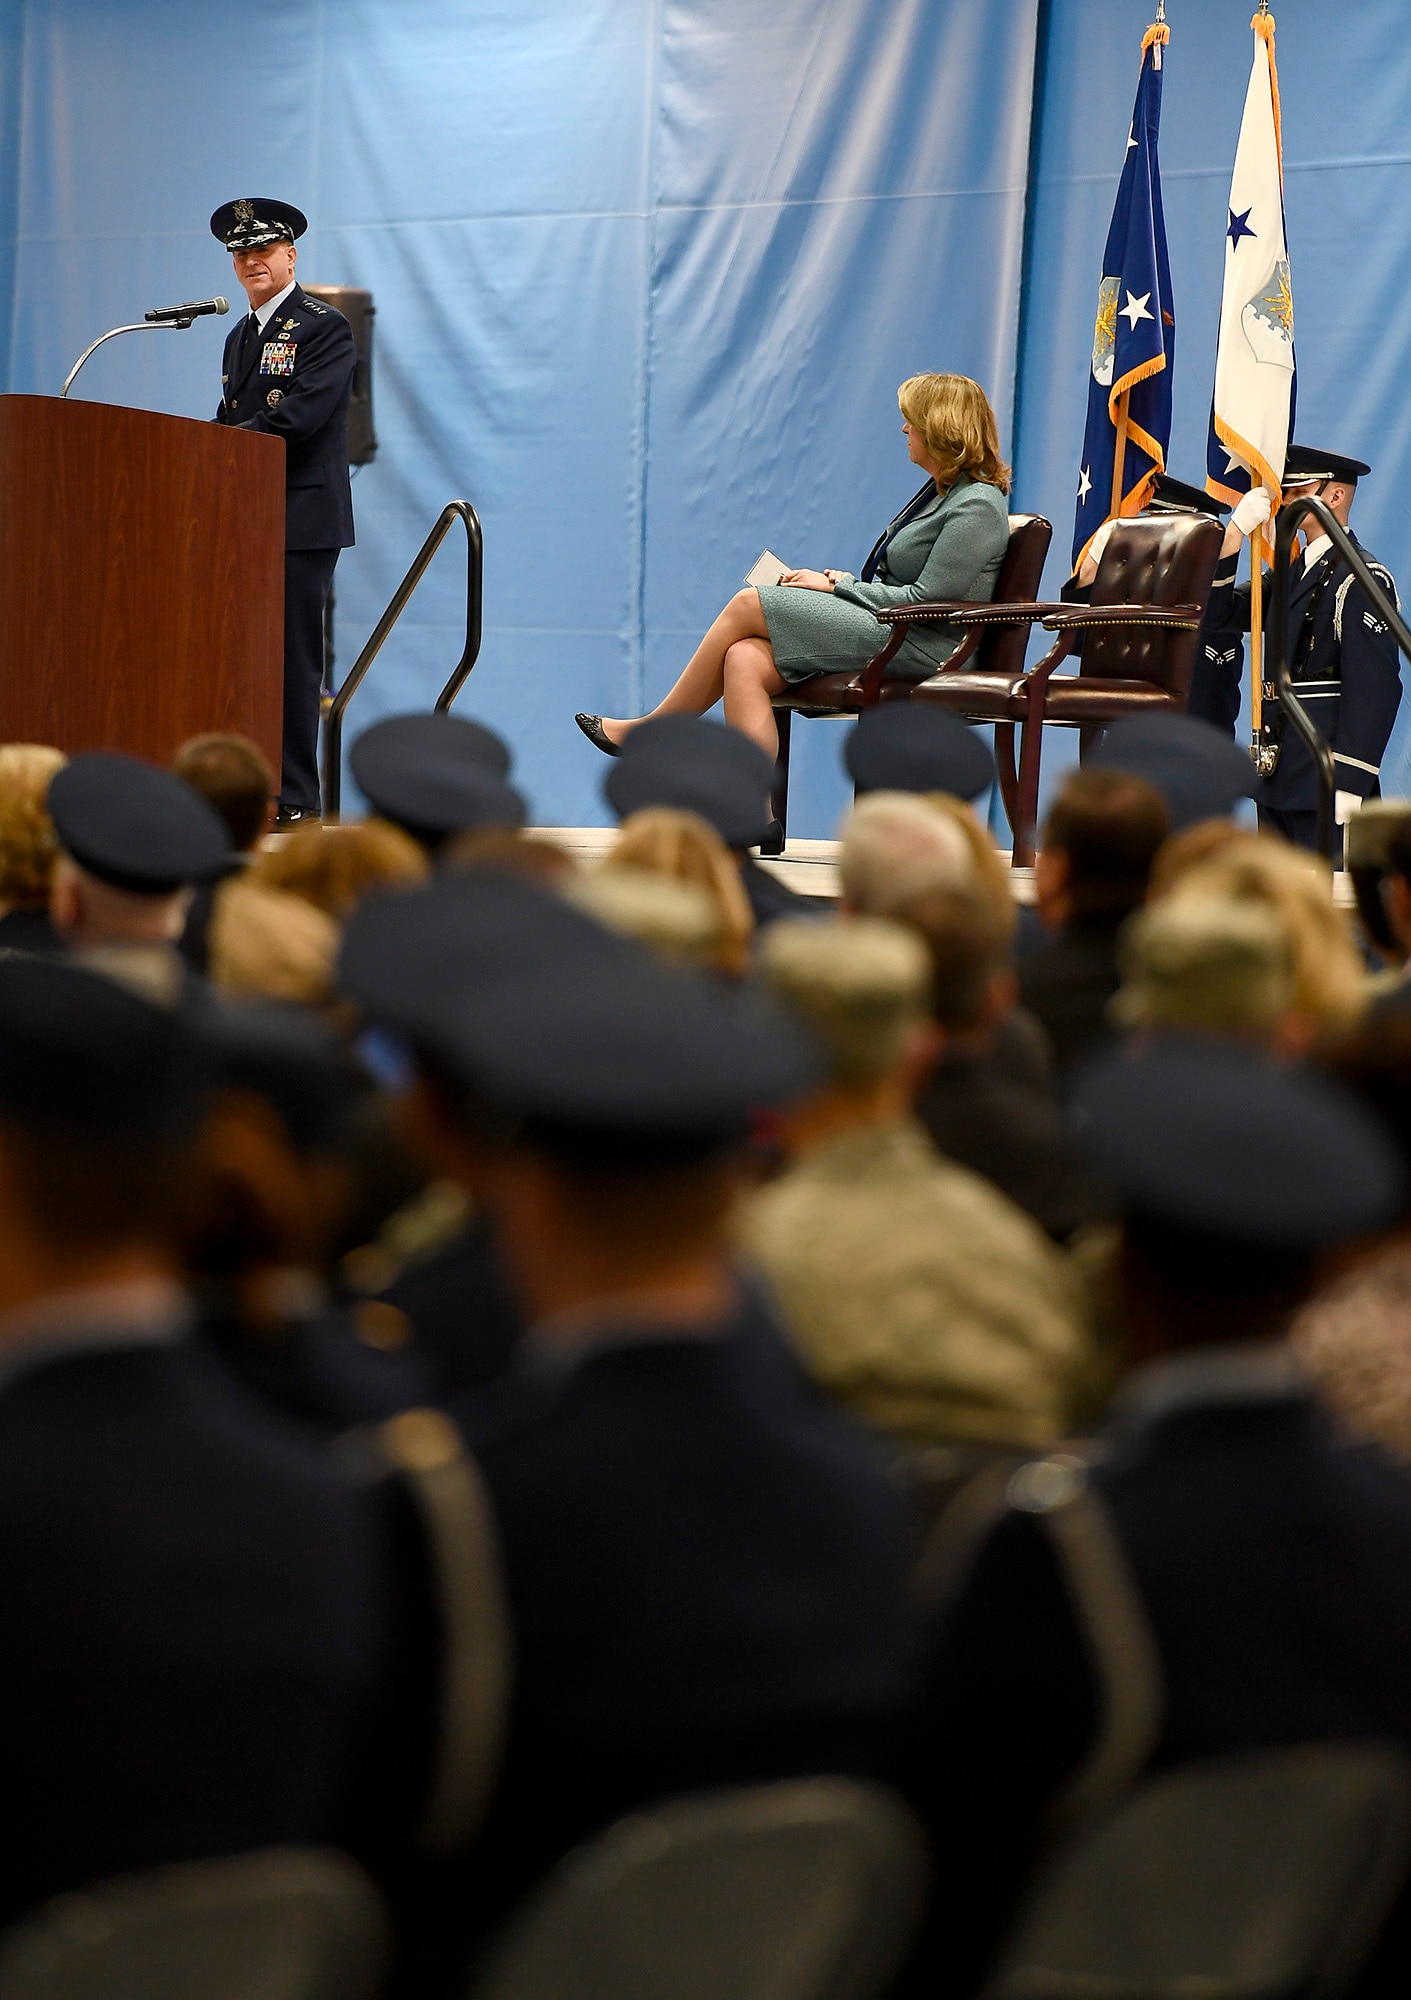 Air Force Chief of Staff Gen. David L. Goldfein speaks about Secretary of the Air Force Deborah Lee James during her farewell ceremony at Joint Base Andrews, Md., Jan. 11, 2017.  James took office as the 23rd secretary of the Air Force in December 2013. (U.S. Air Force photo/Scott M. Ash)